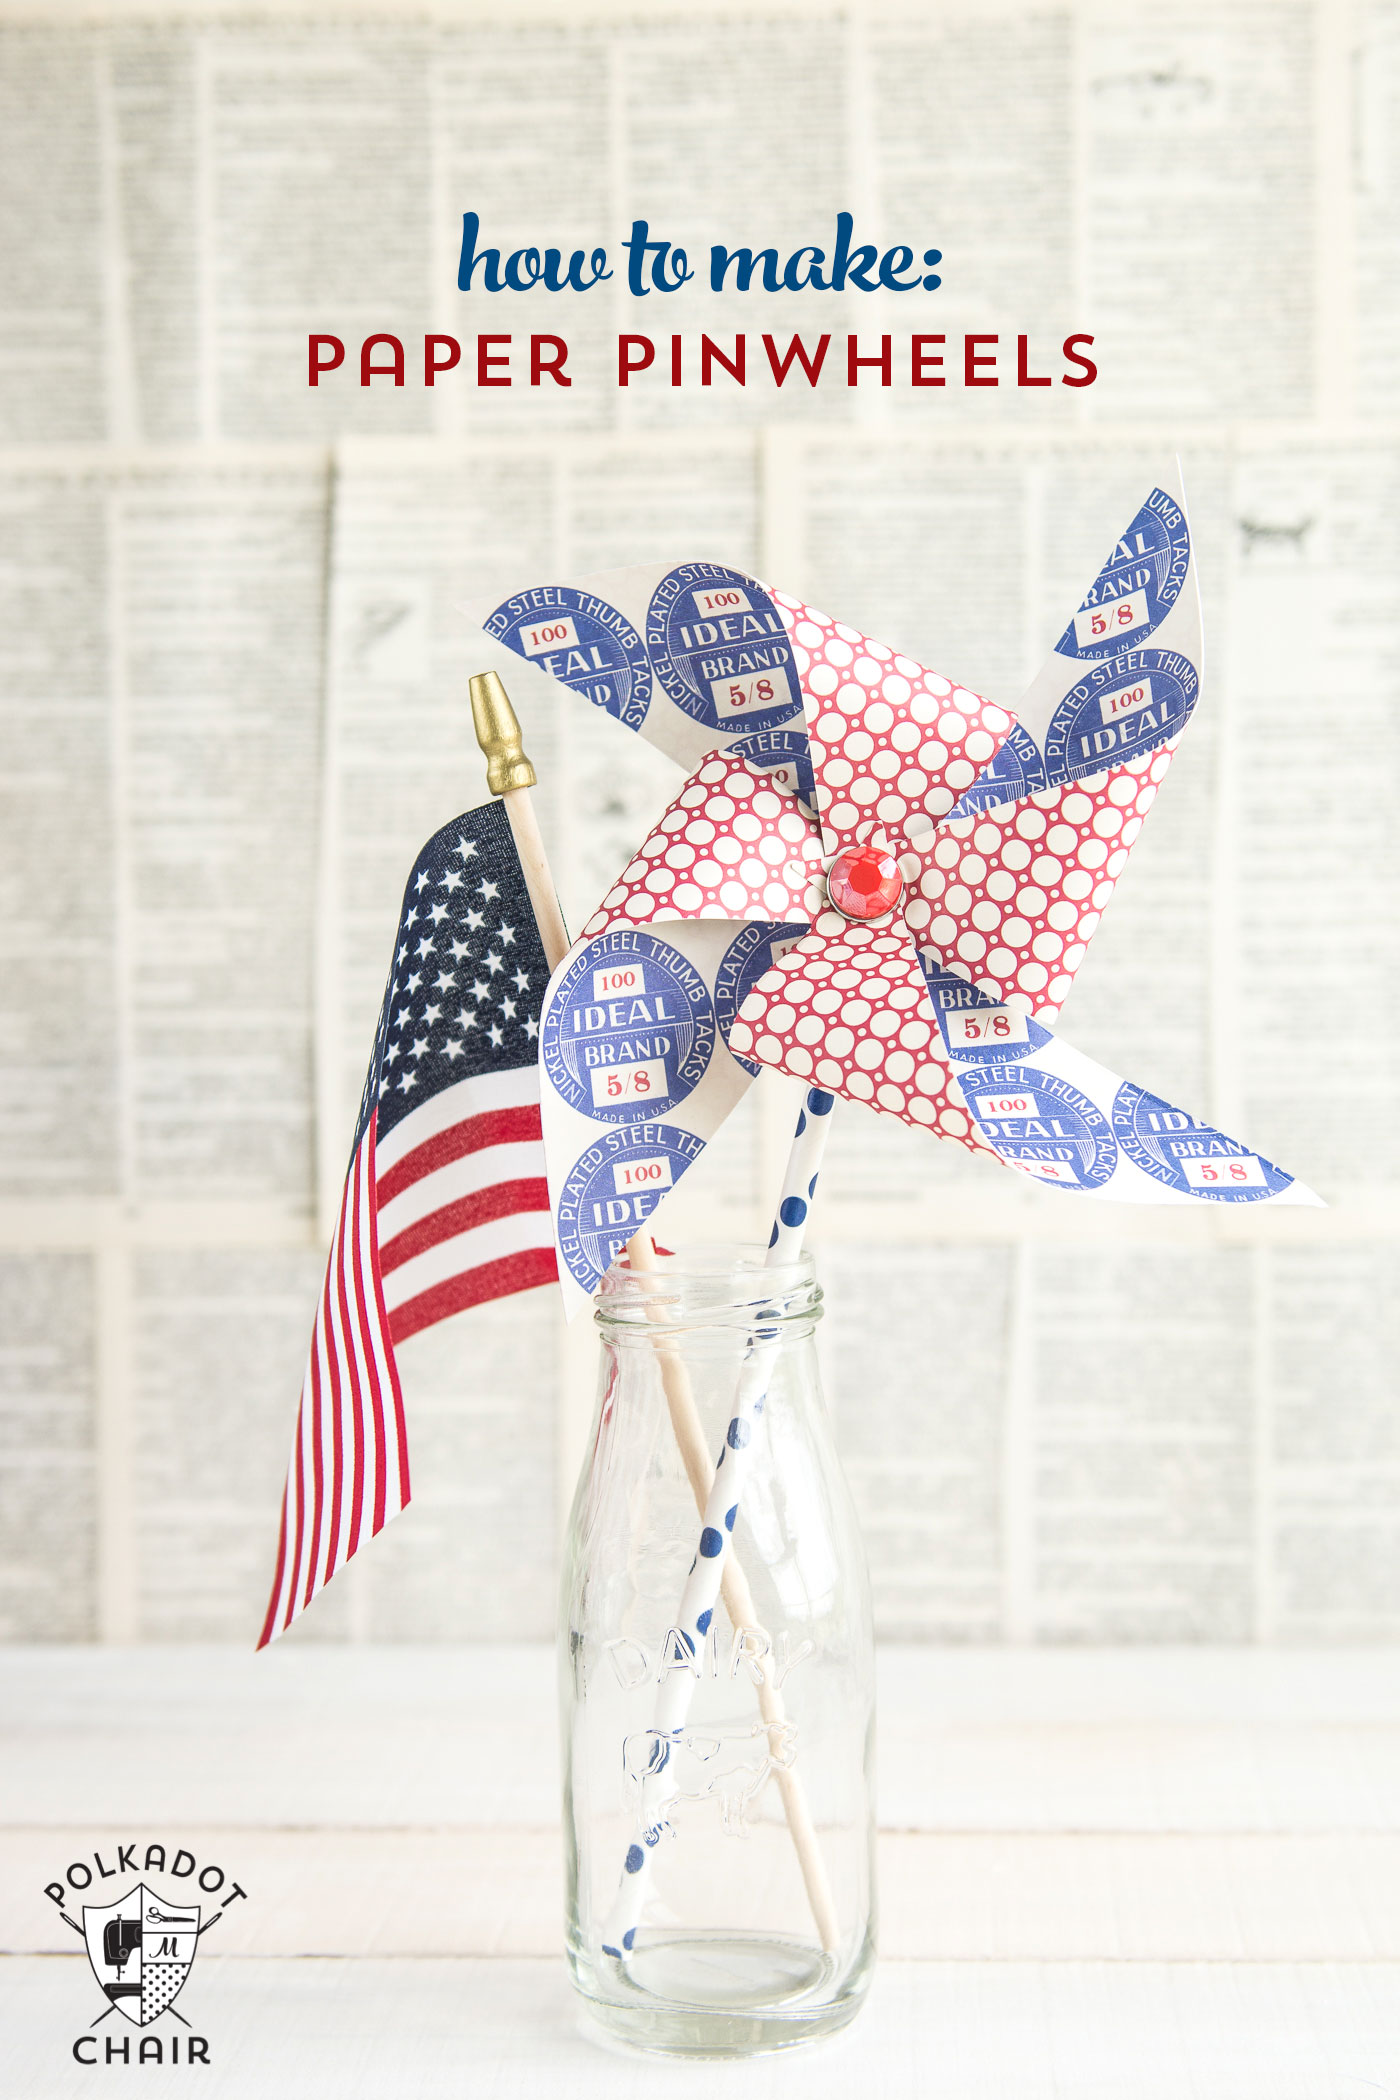 Cute tutorial on how to make a pinwheel using a paper straw. Great craft idea to decorate for the 4th of July.